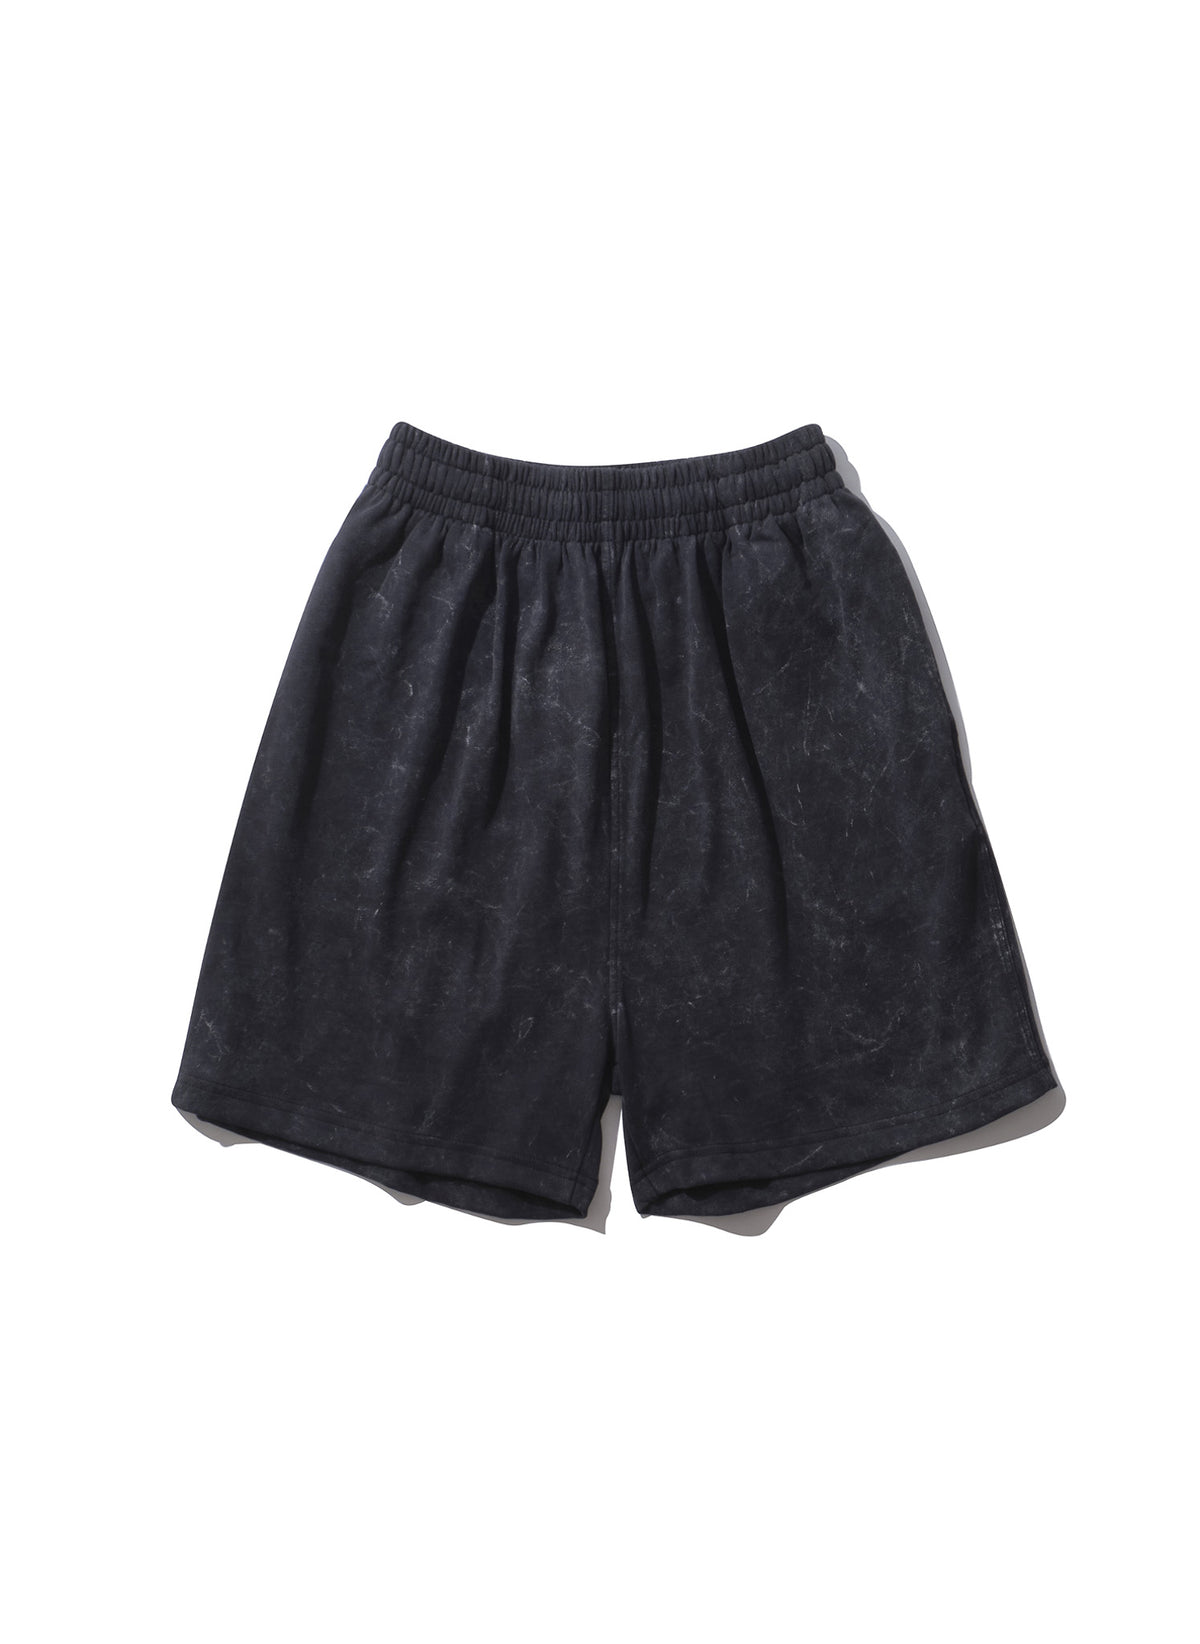 WILLY CHAVARRIA / NORTHSIDER SHORTS WASHED BLACK